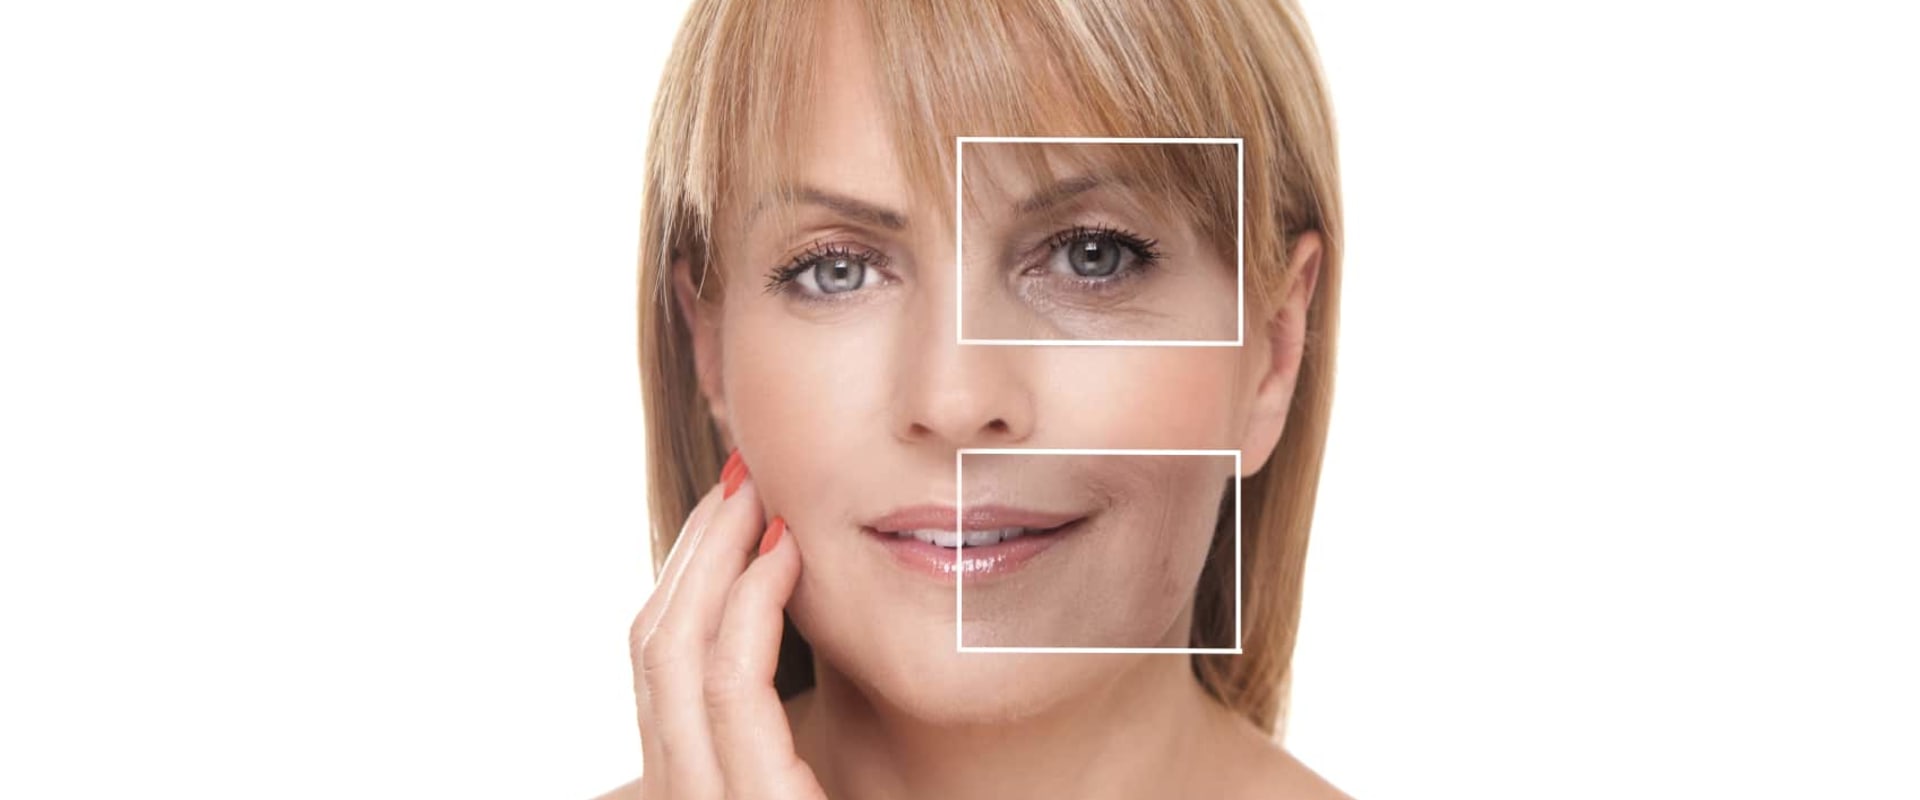 Get the Best Results from Dysport Injections